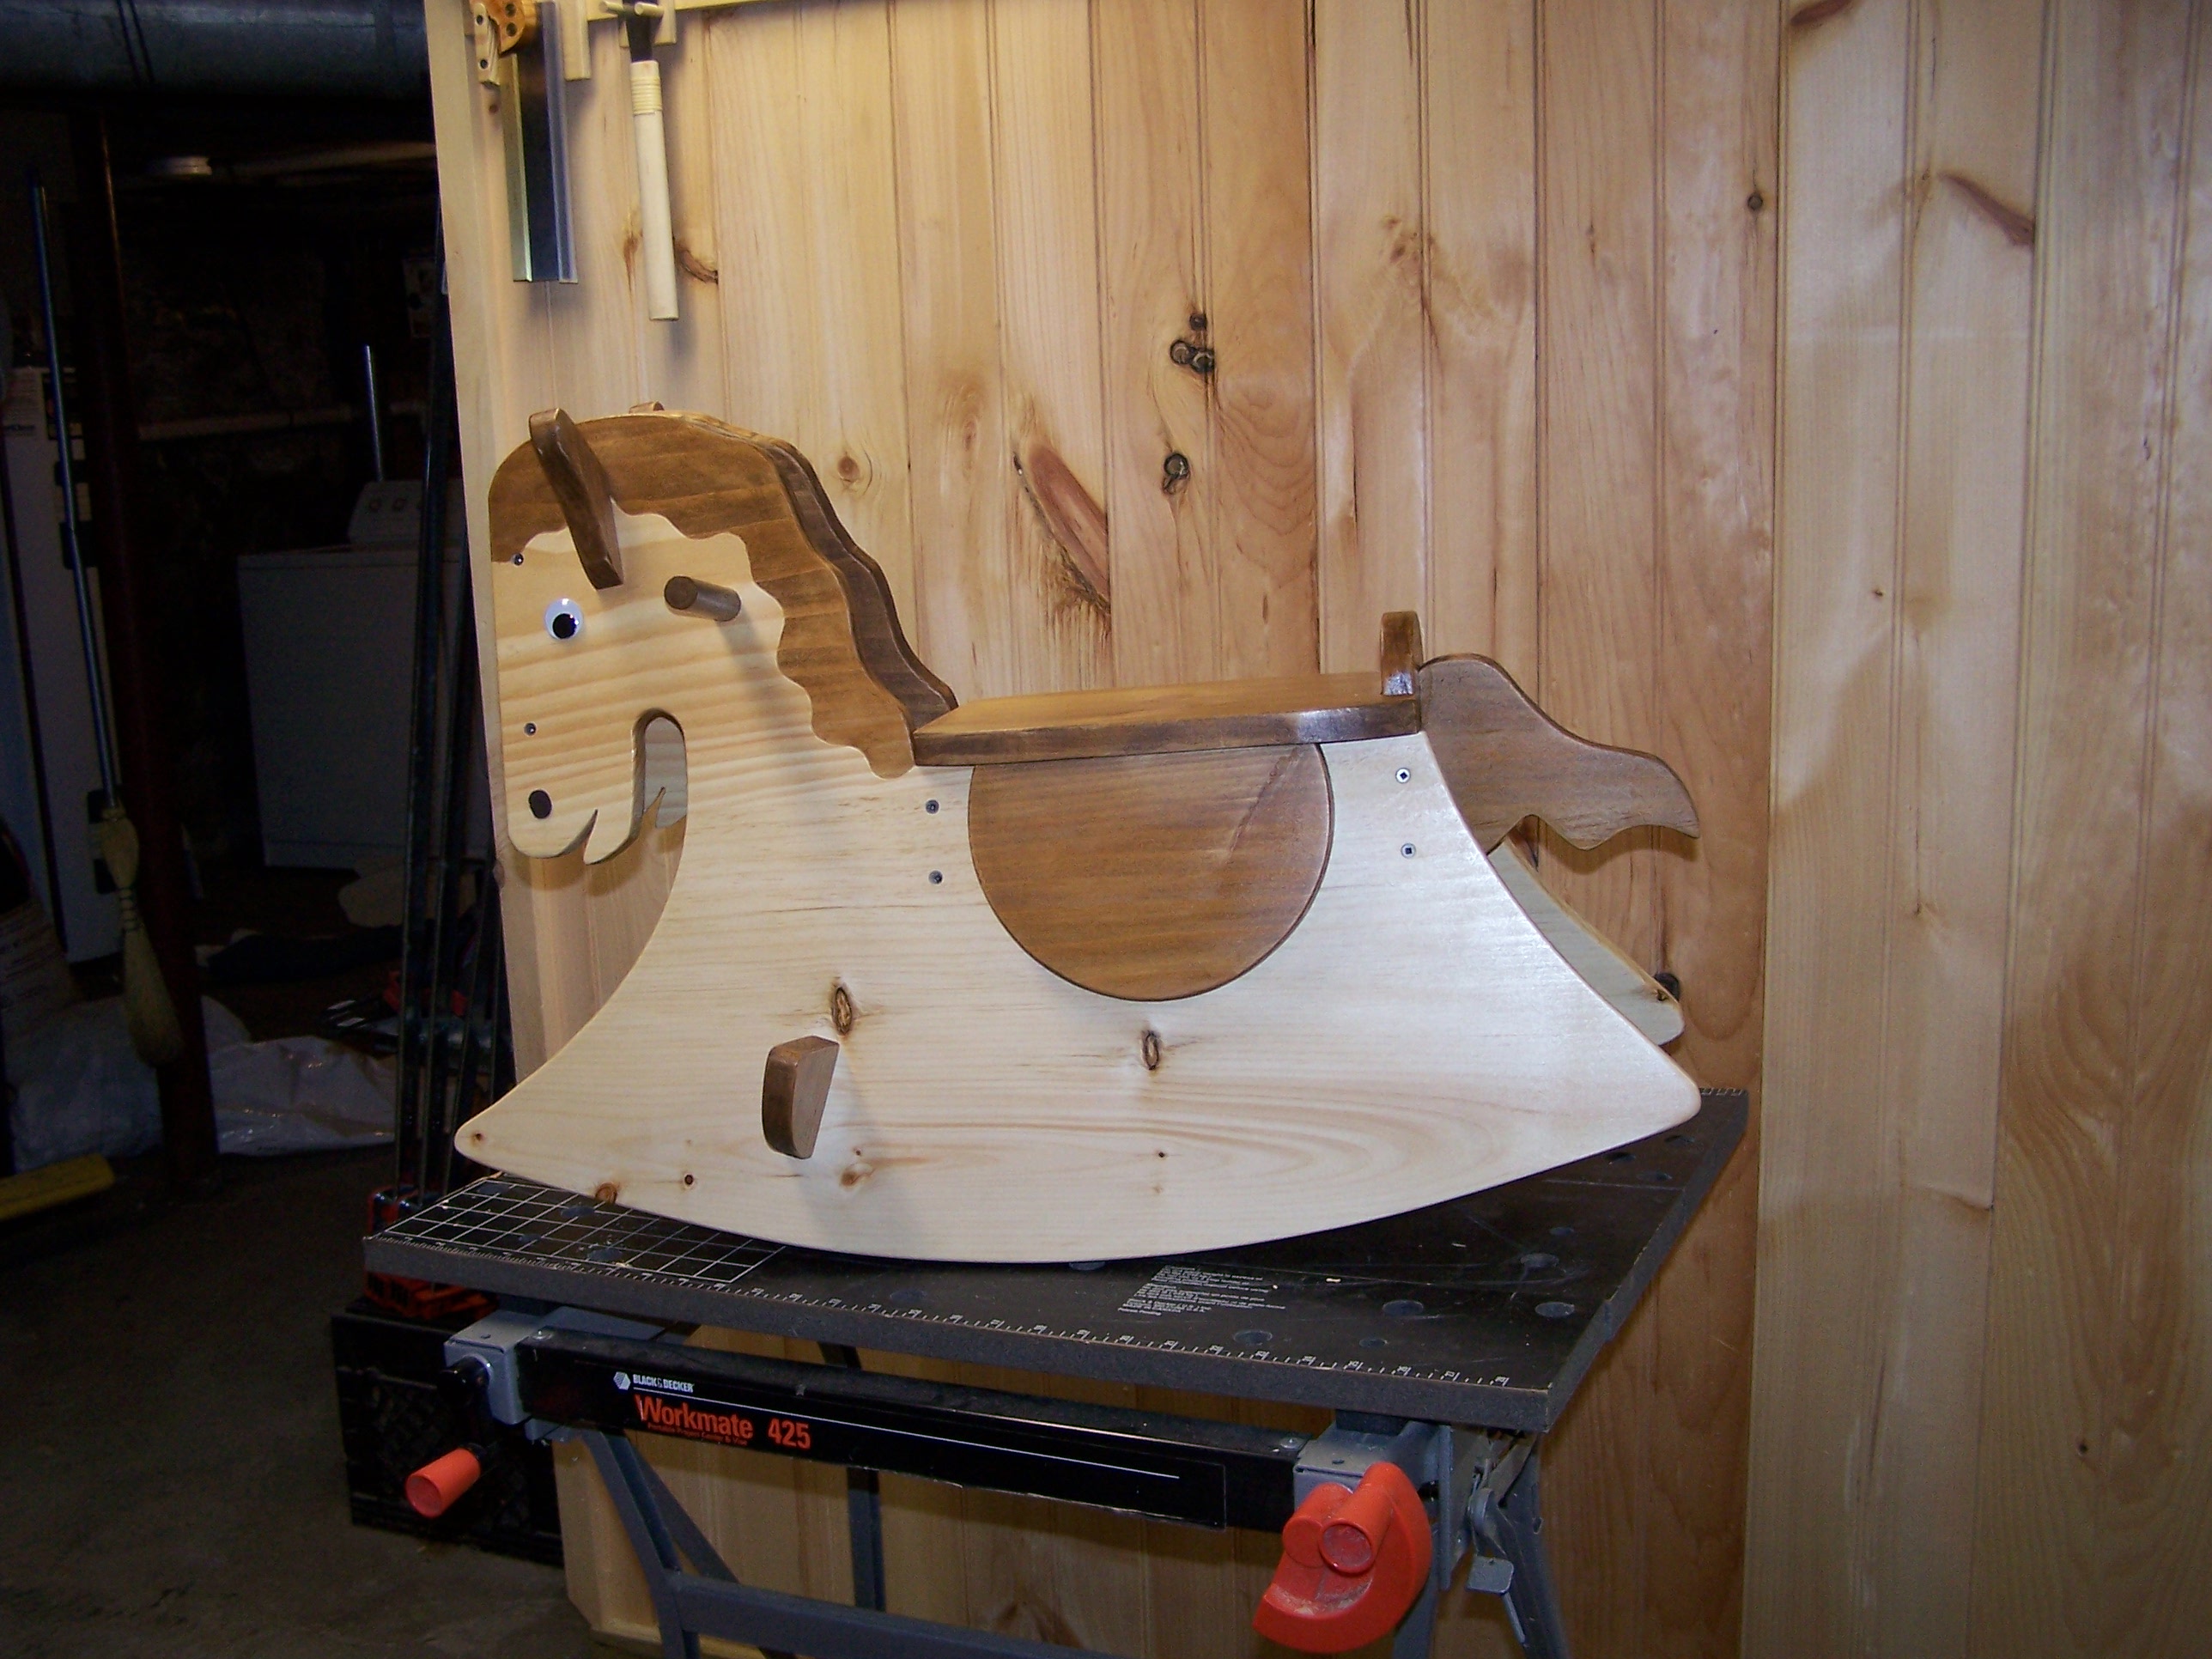 Rocking Horse Plans Woodworking